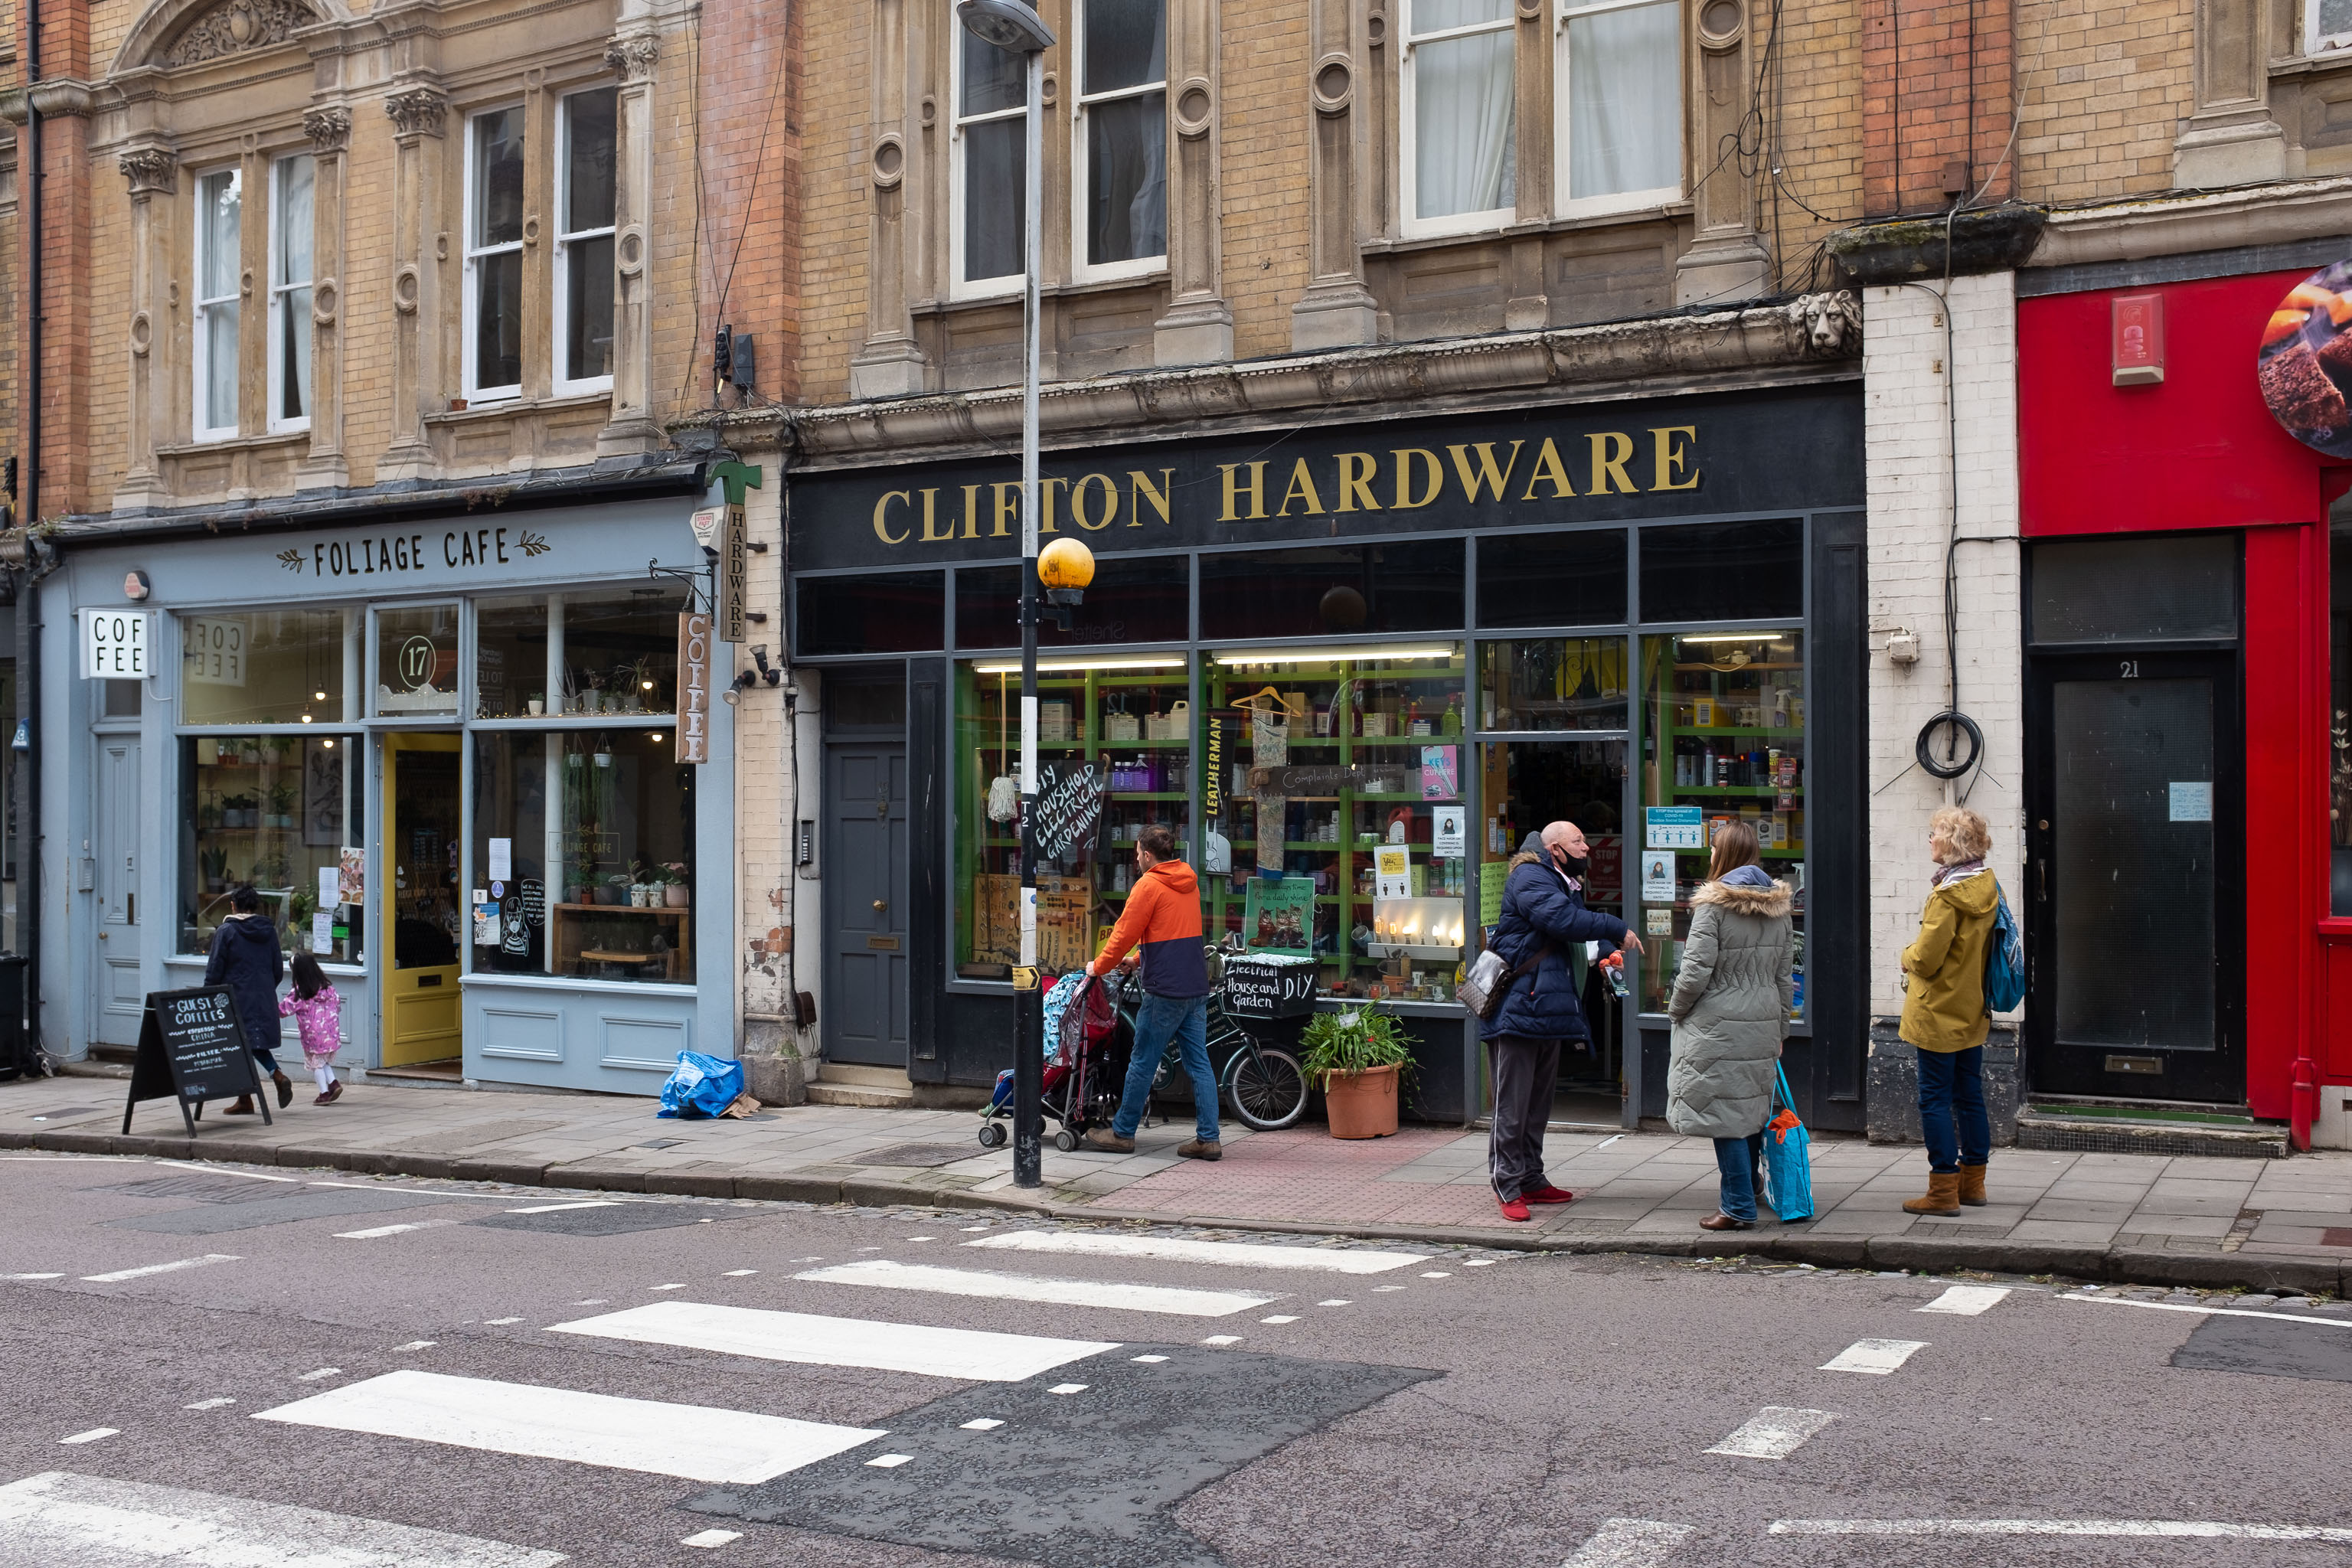 Clifton Hardware
One of those places where if you go in and ask for some fly spray, a socket set and some tachyon conduit for a Type 40 TARDIS they'll just start ru...